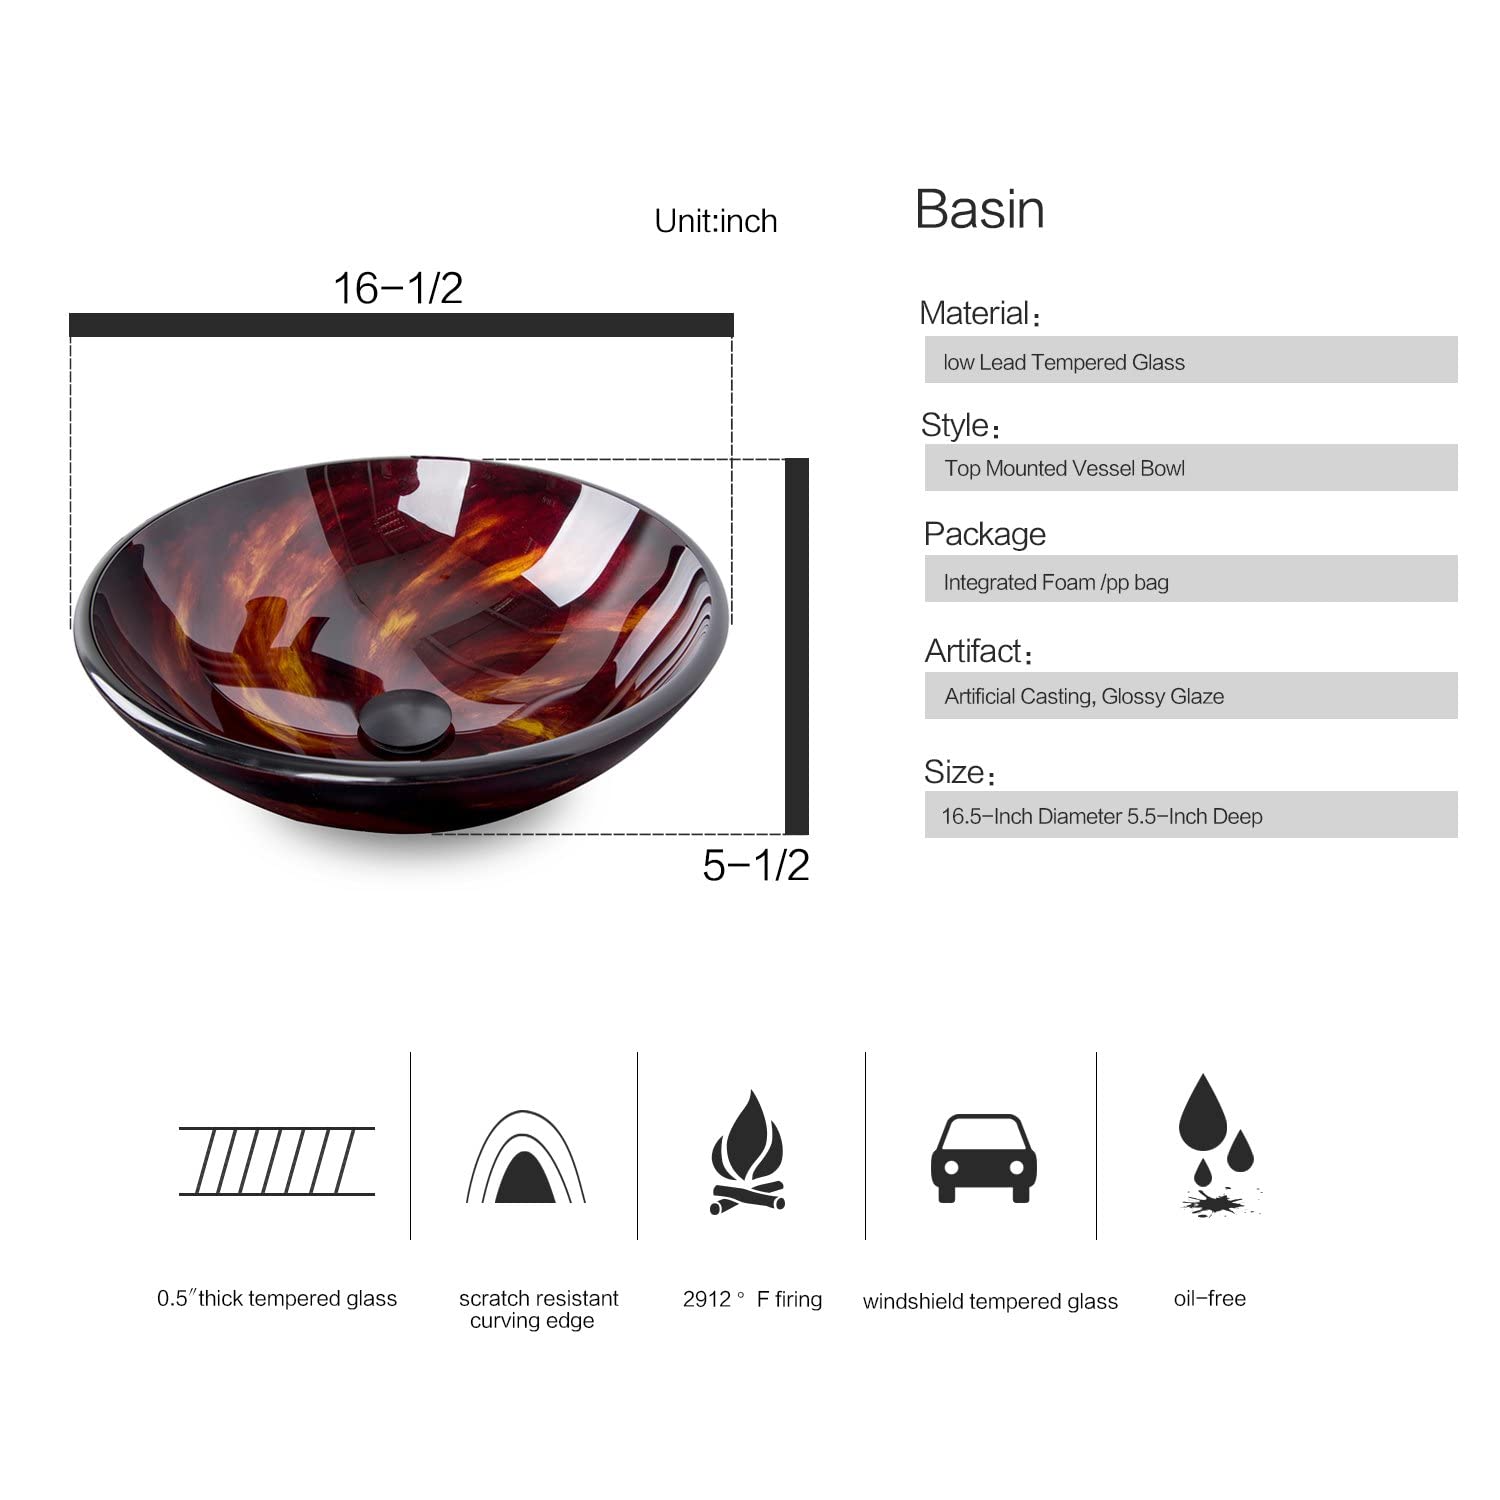 Elecwish frame red glass sink size and details